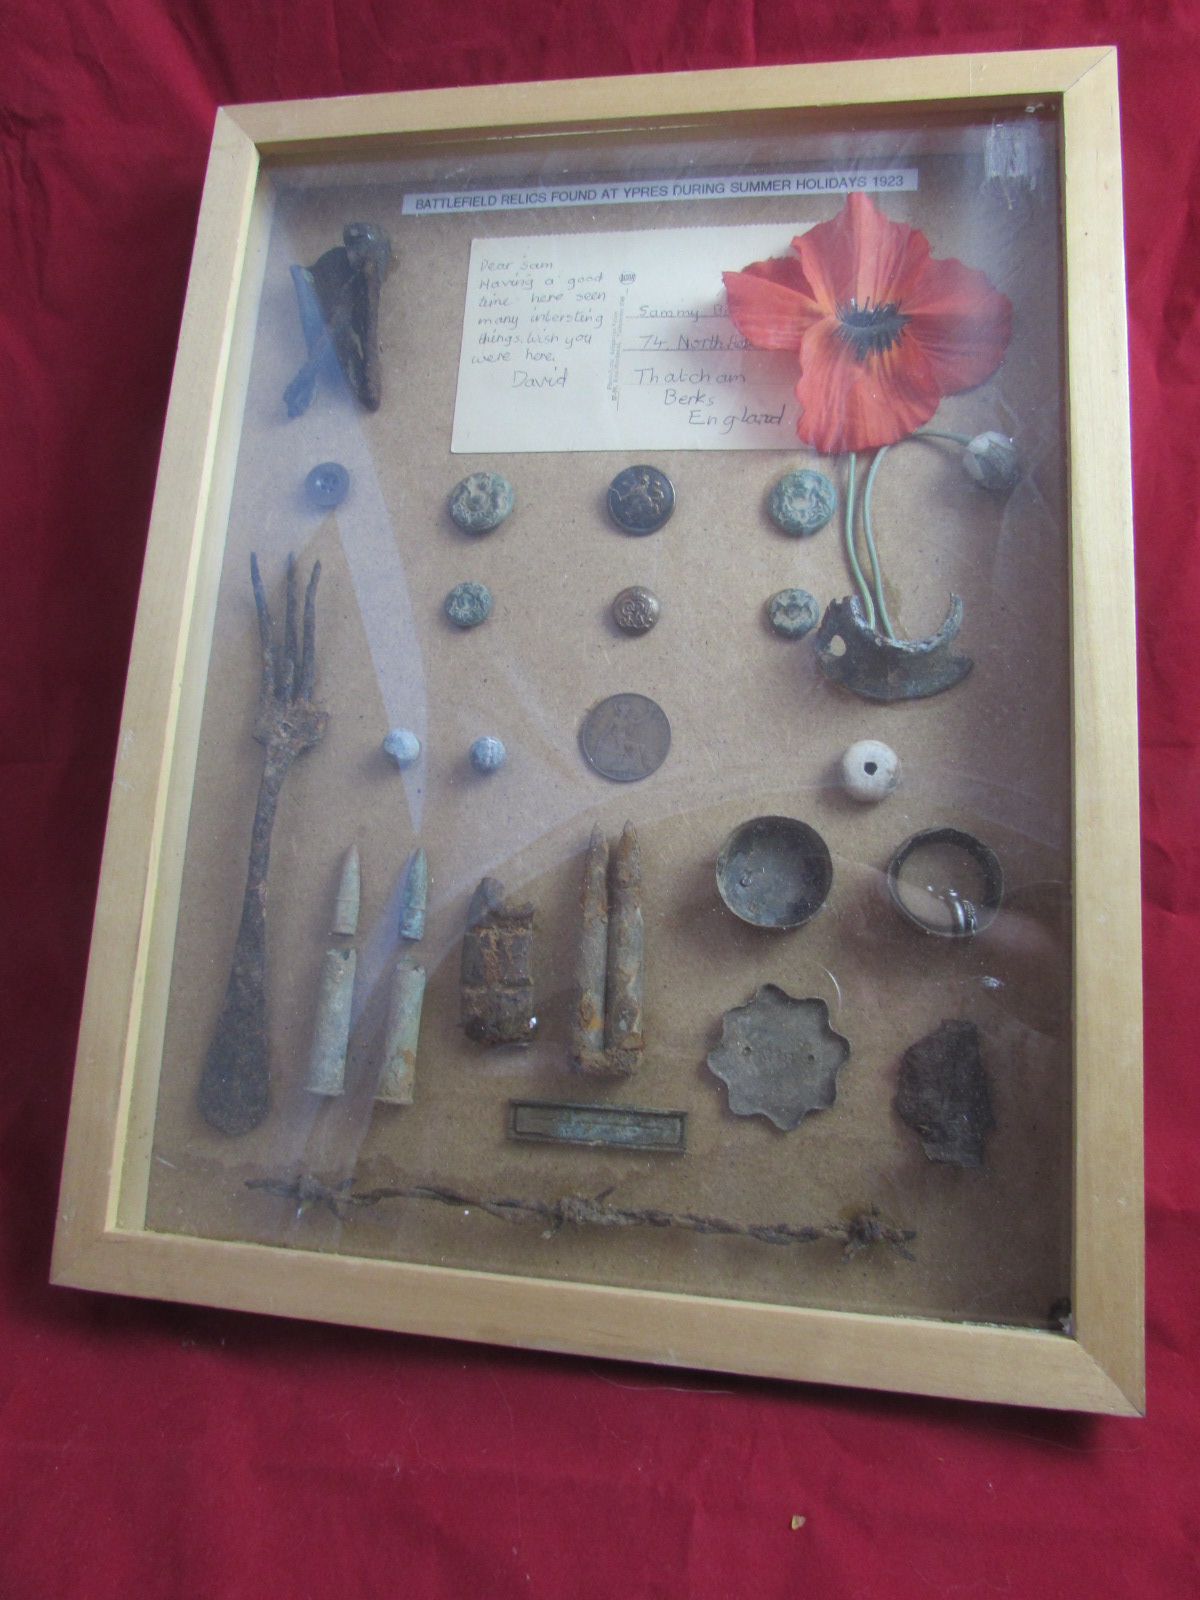 WW1 Battlefield Relics found at Ypres